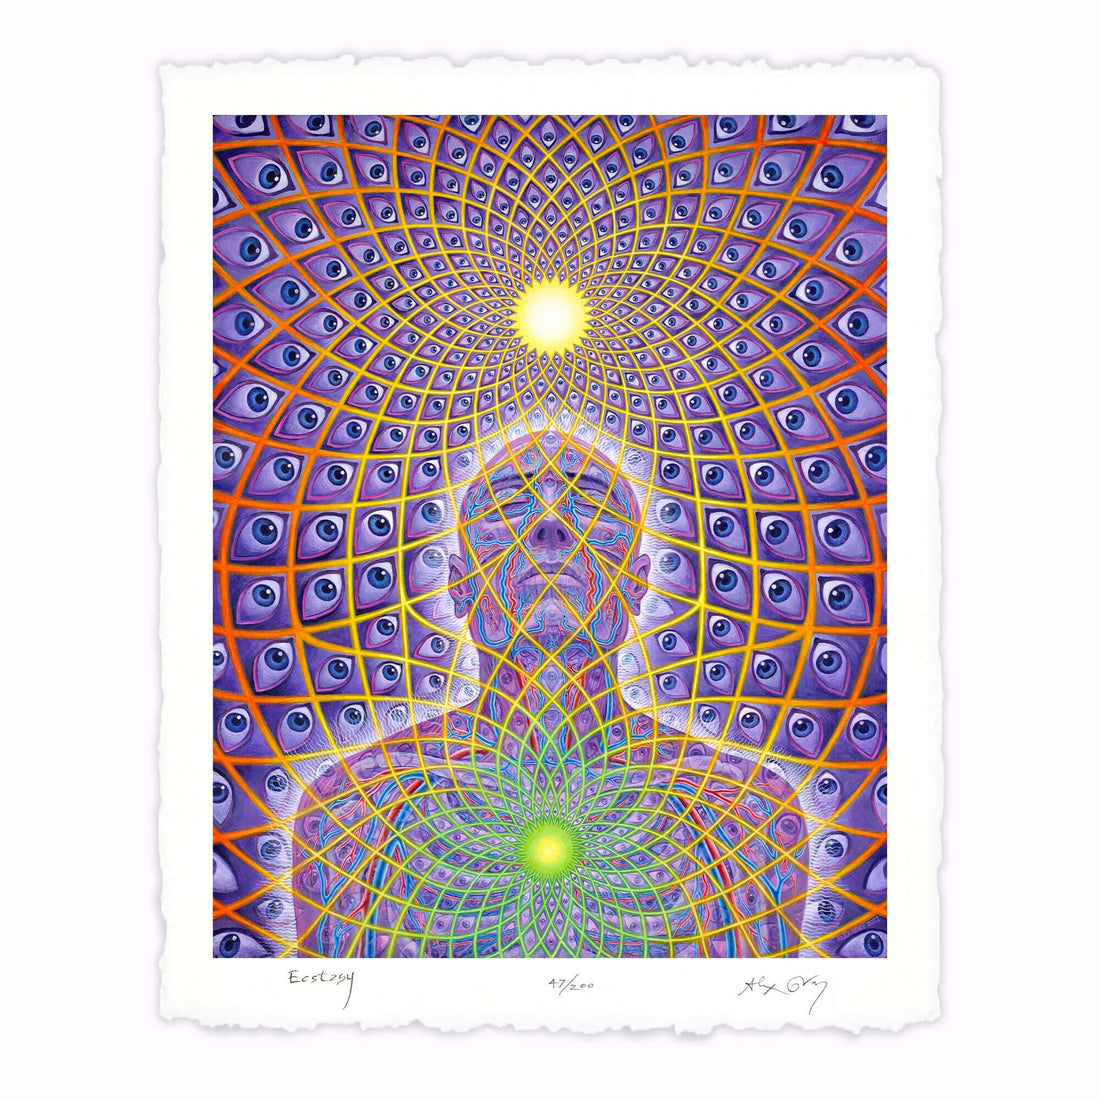 Ecstasy by Alex Grey - New Artwork, Never Before Released!